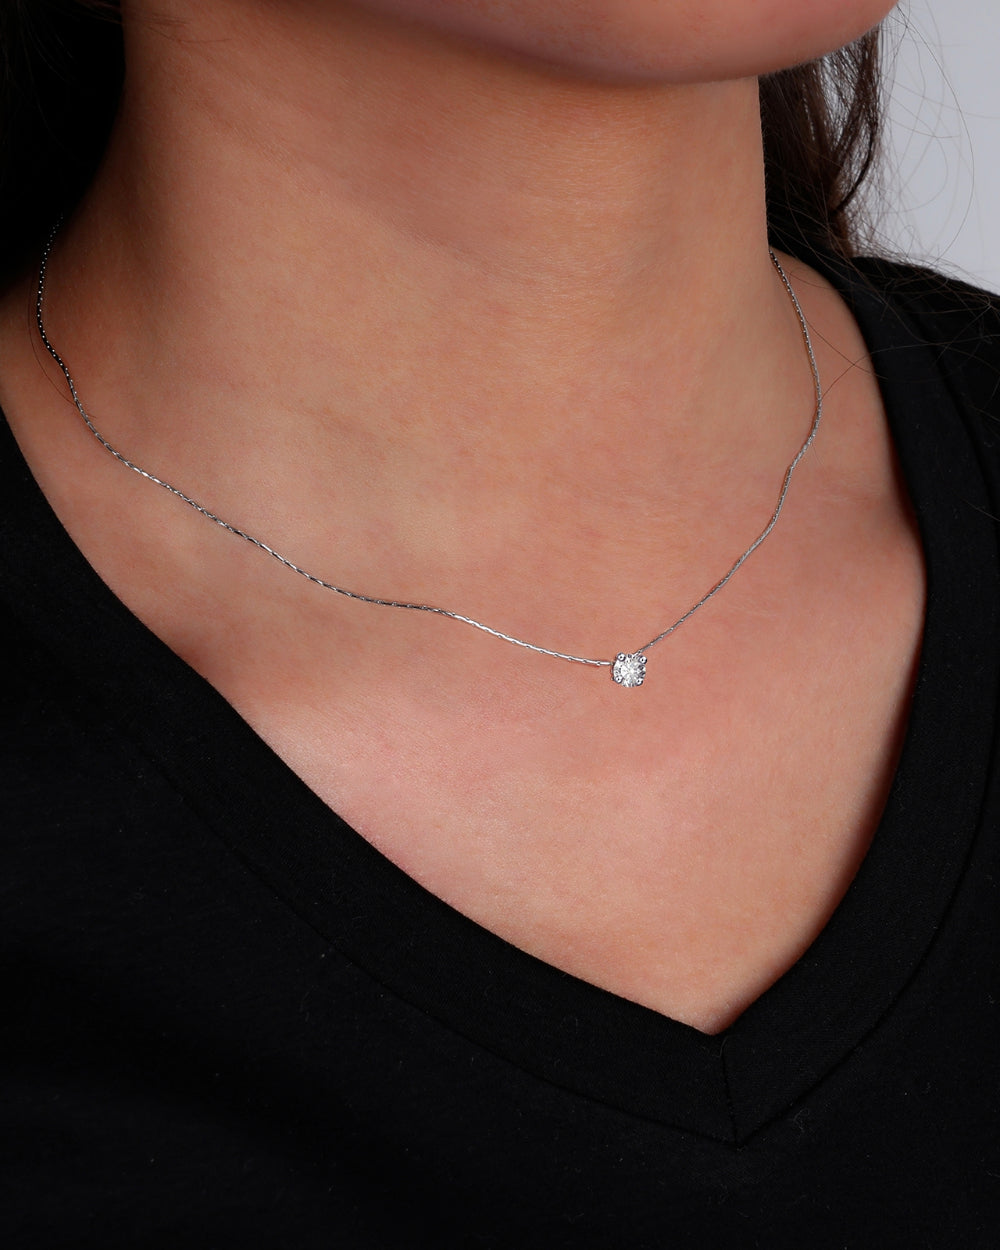 PURITY NECKLACE 925. - WHITE GOLD